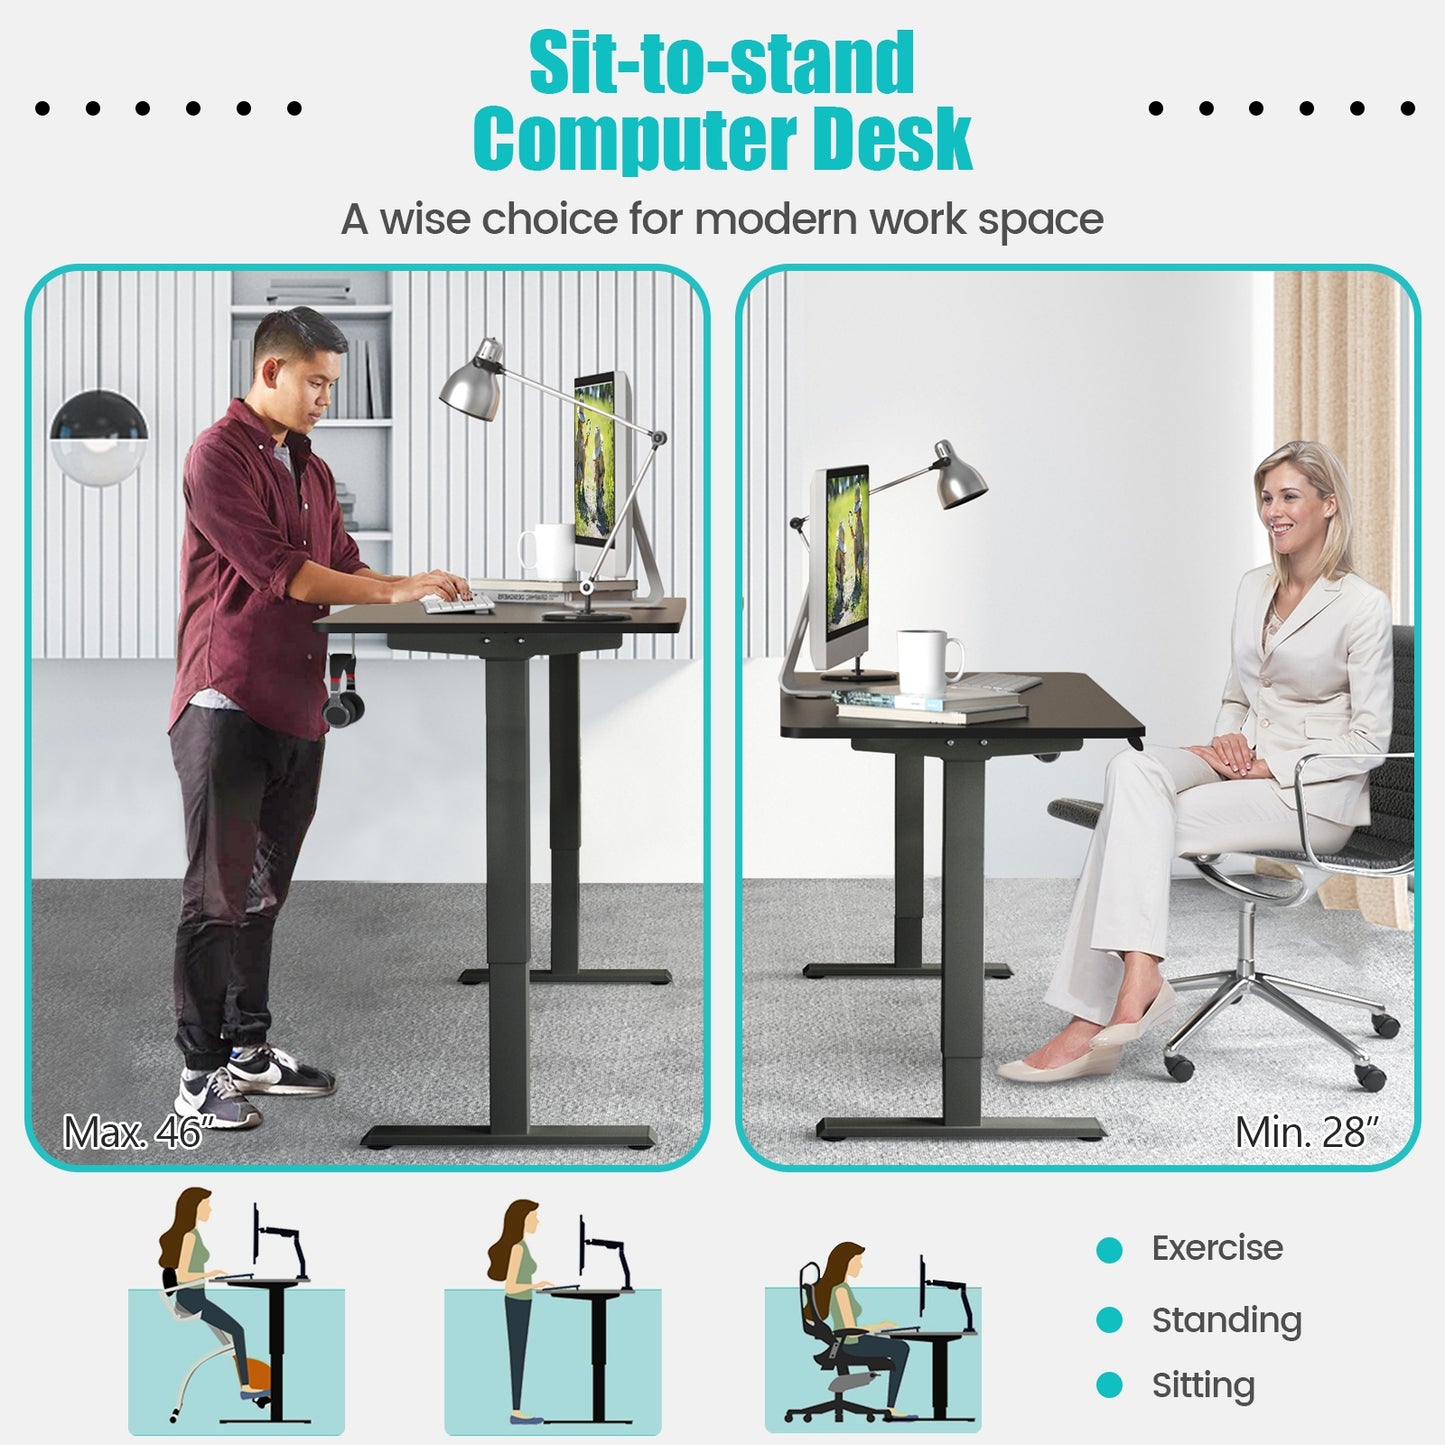 Electric Height Adjustable Standing Desk with Memory Controller-Black